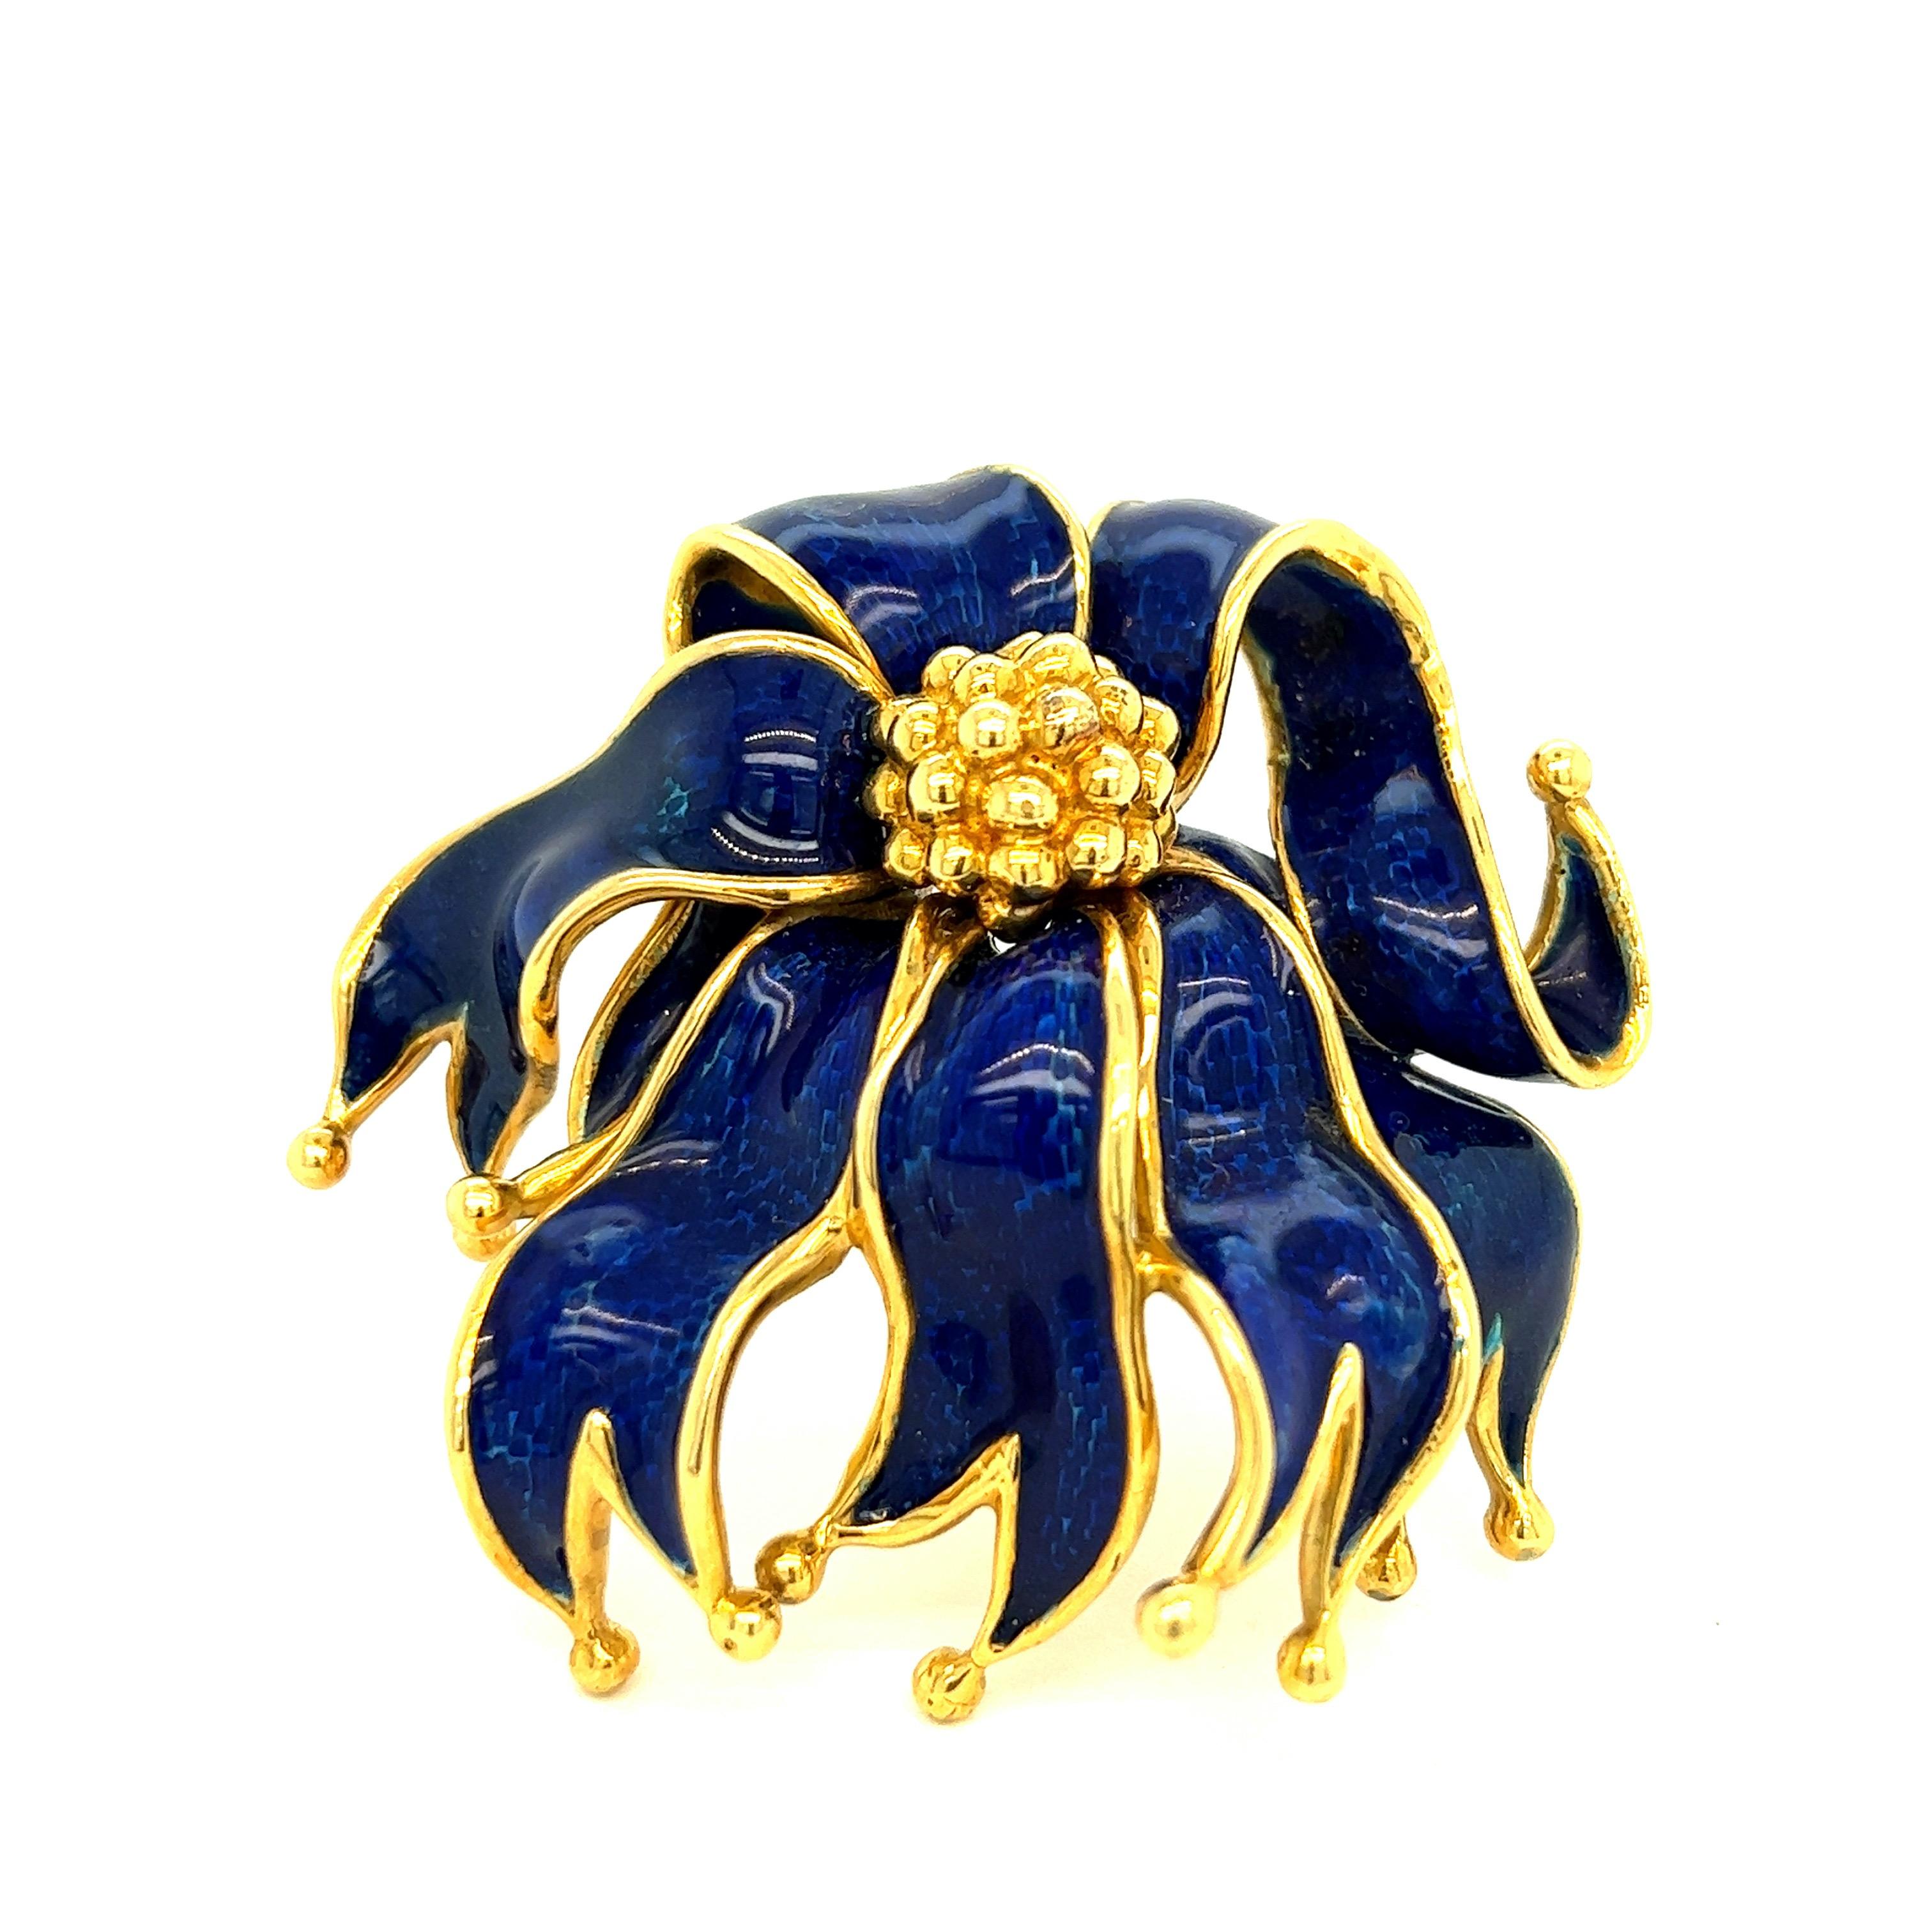 Large 18k gold and blue enamel ribbon brooch, crafted by Tiffany & Co. The brooch measures 2